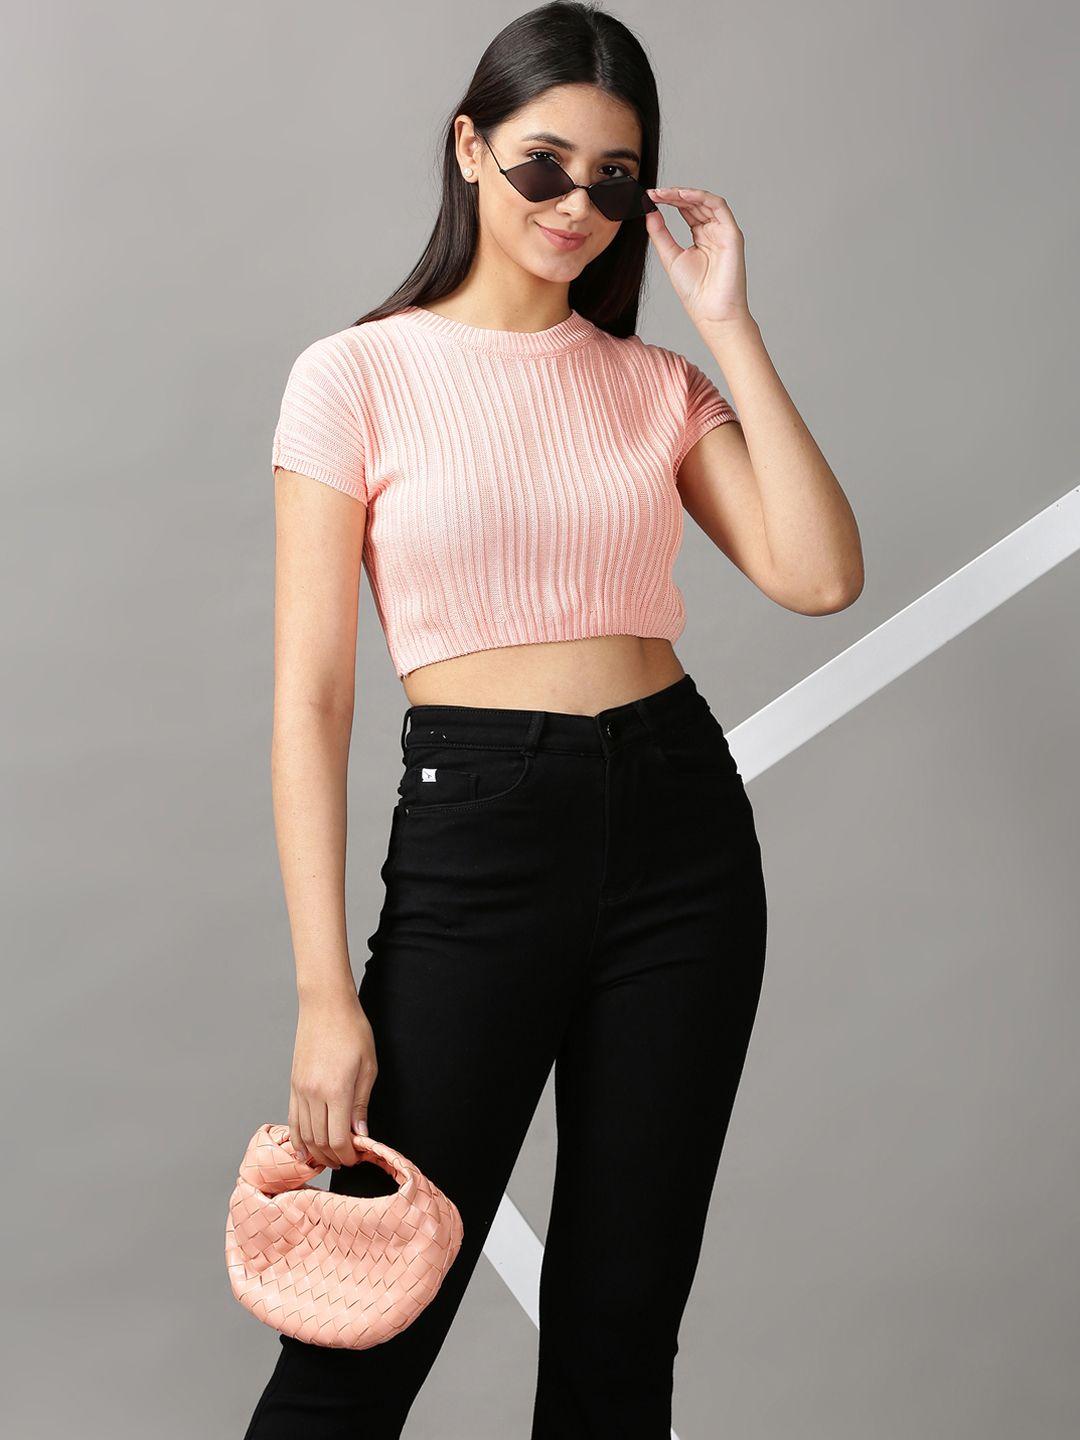 showoff-women-pink-striped-lace-crop-top